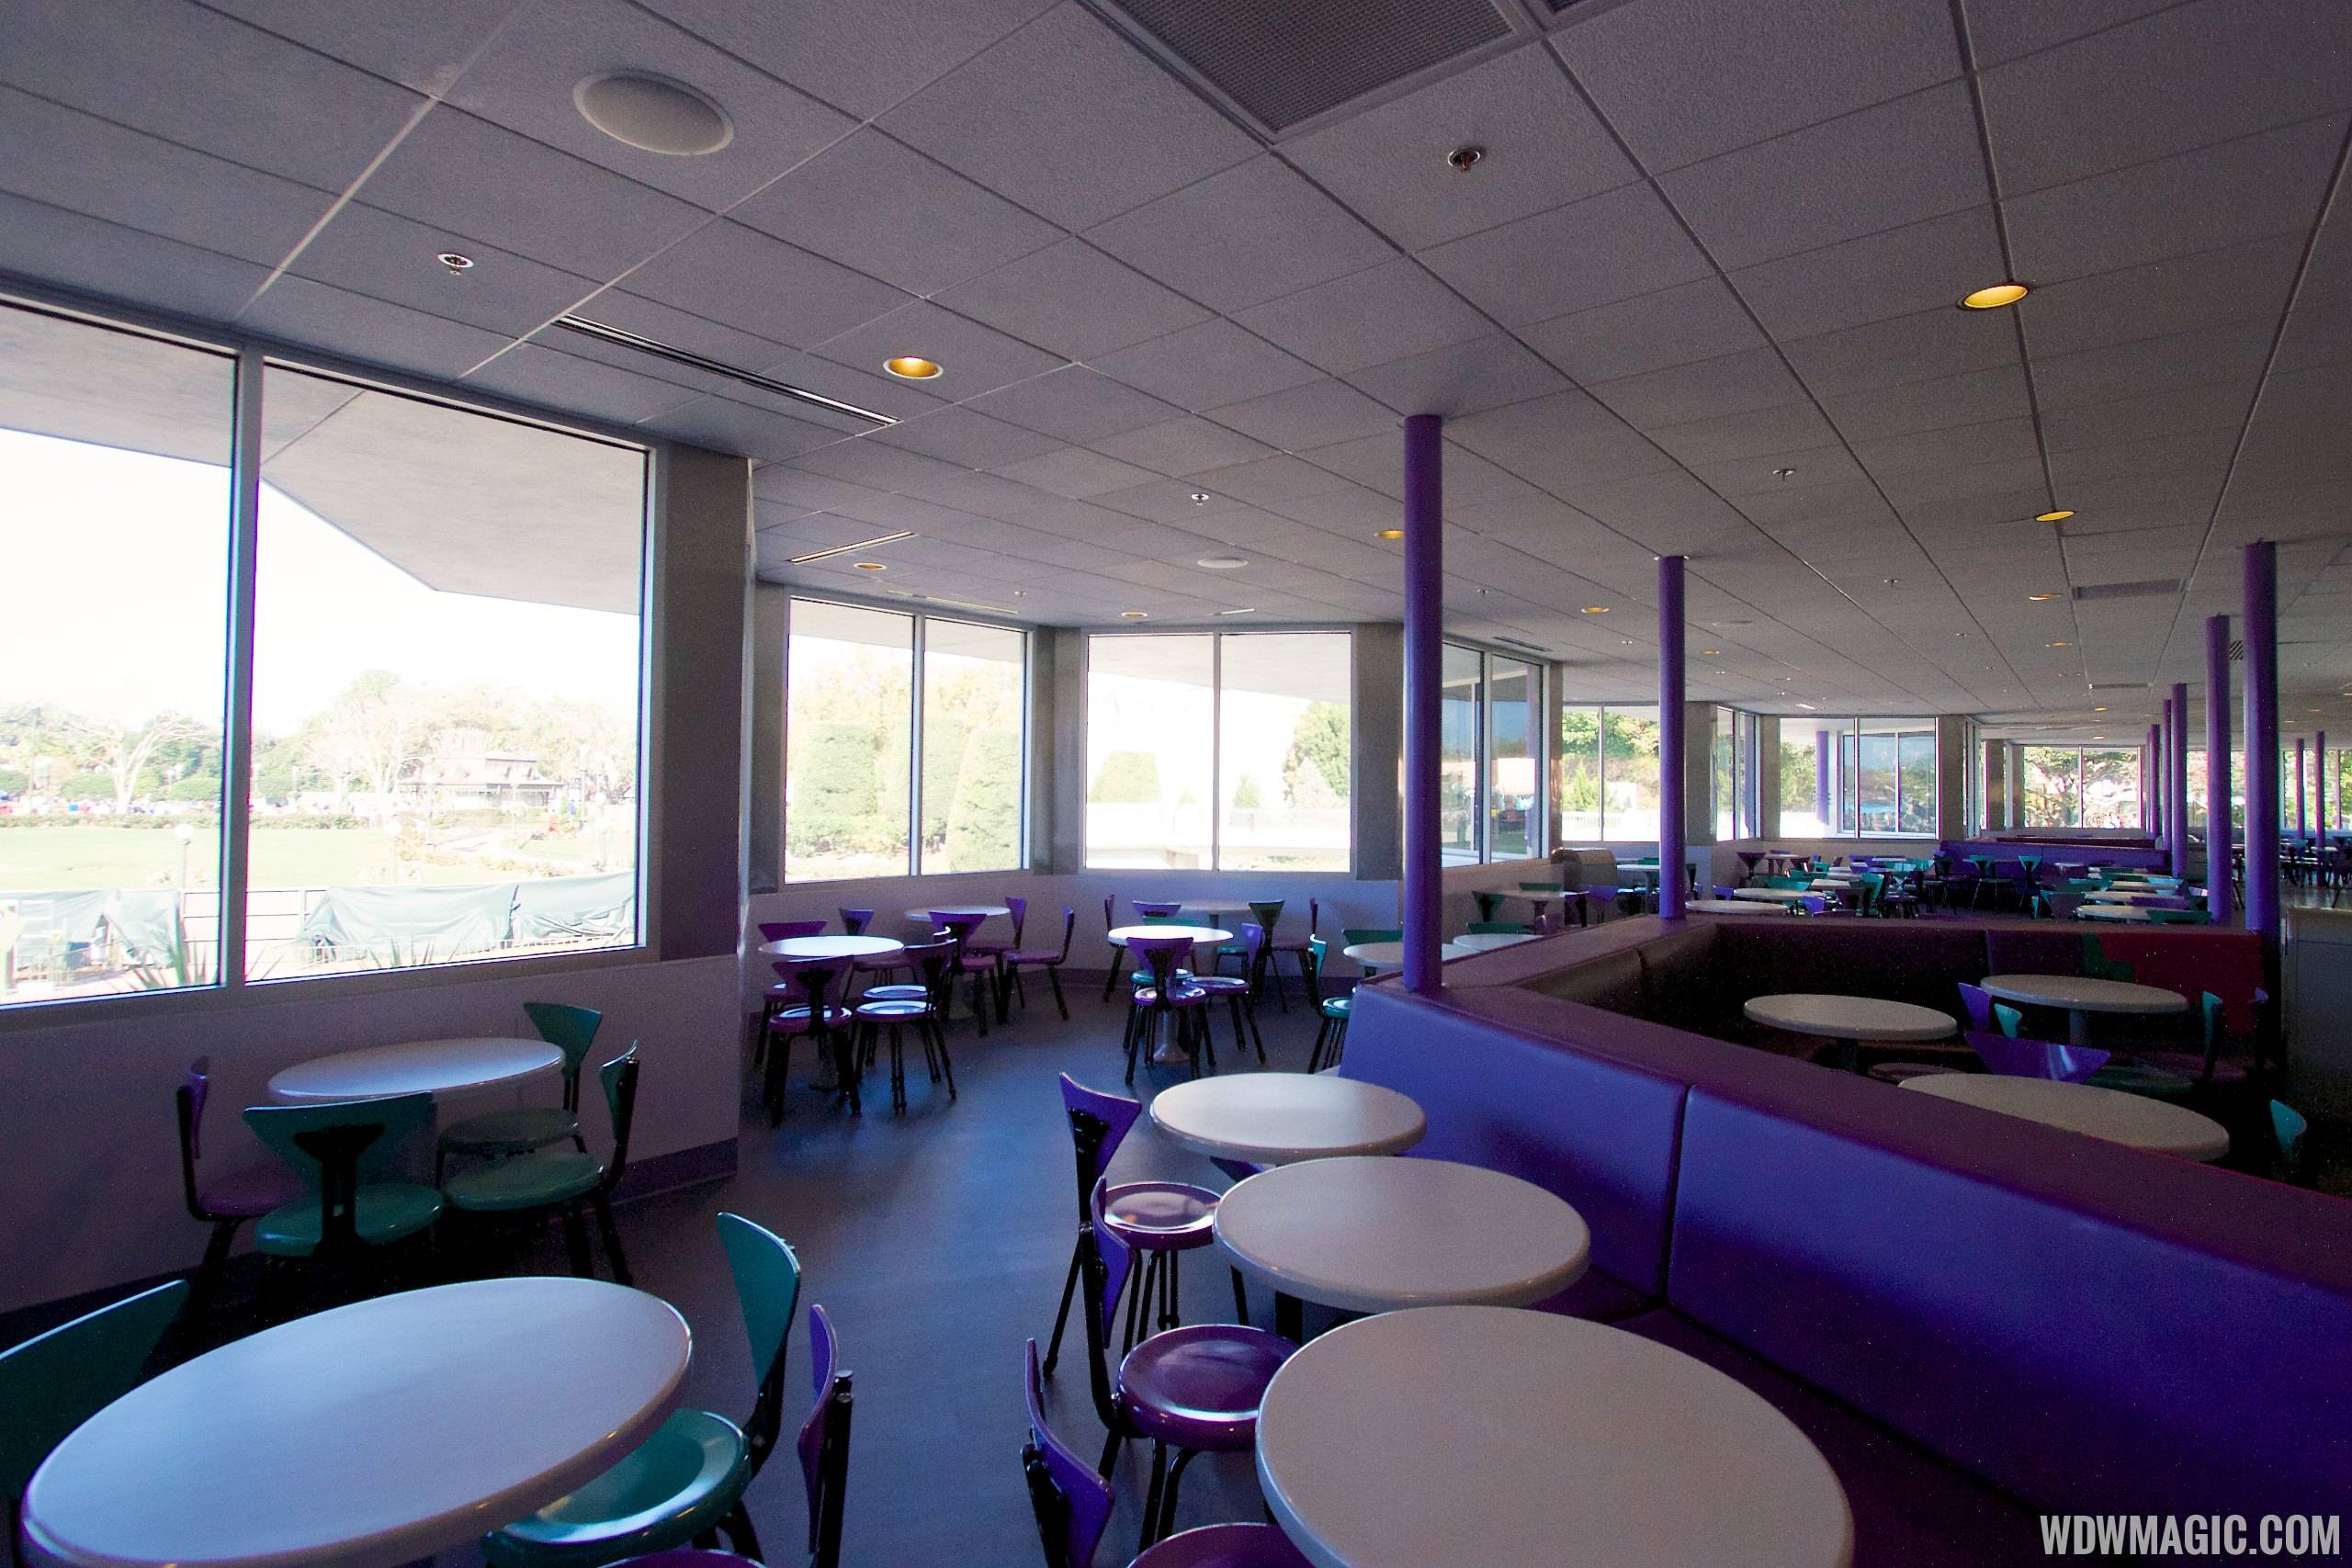 Cosmic Ray's Patio enclosed